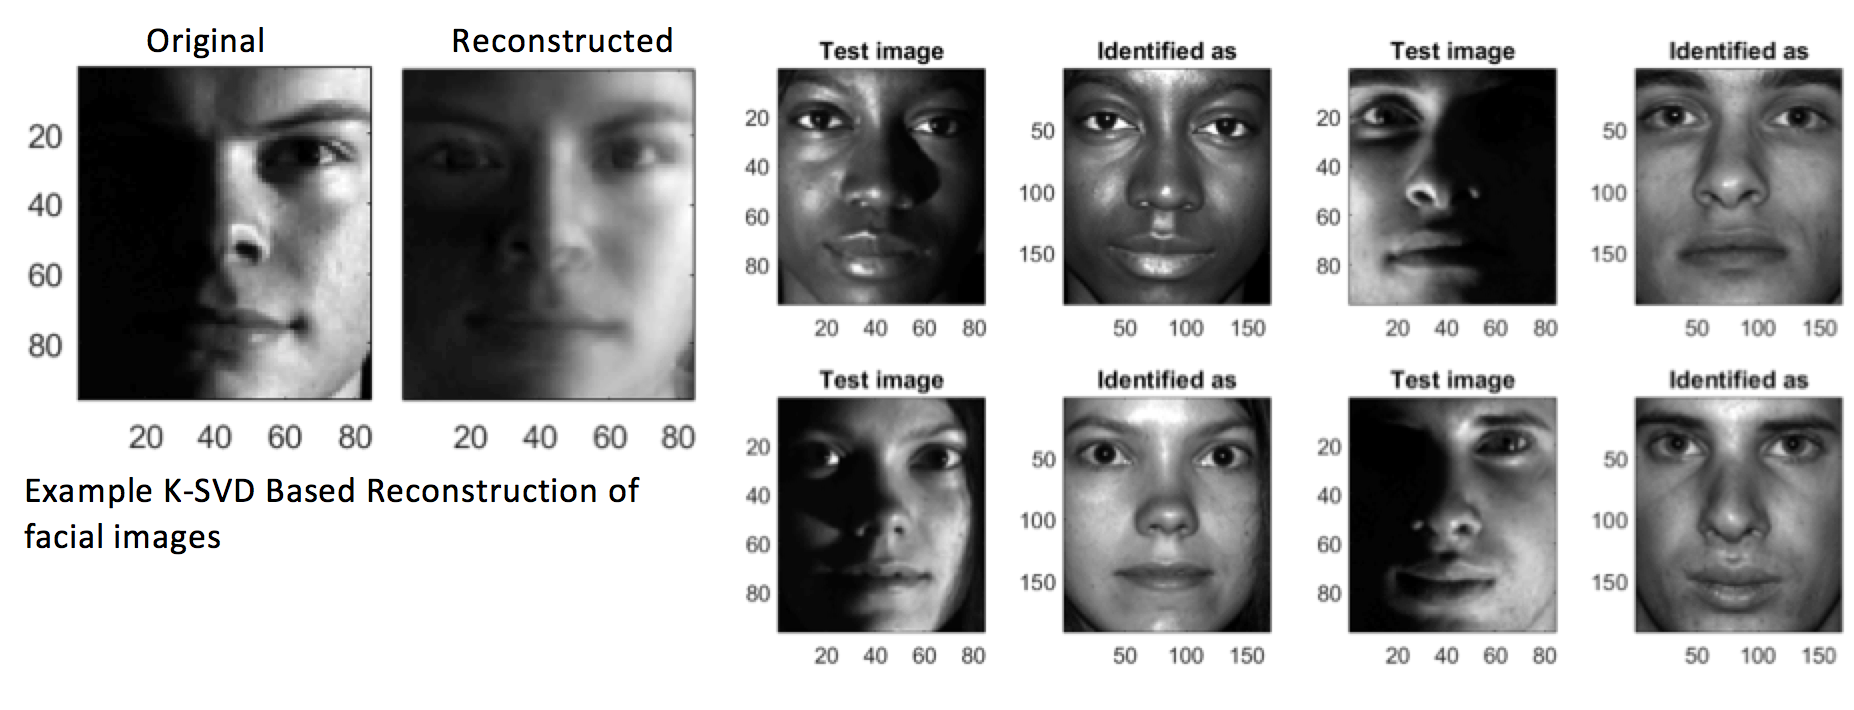 faces identified/reconstructed by a computer